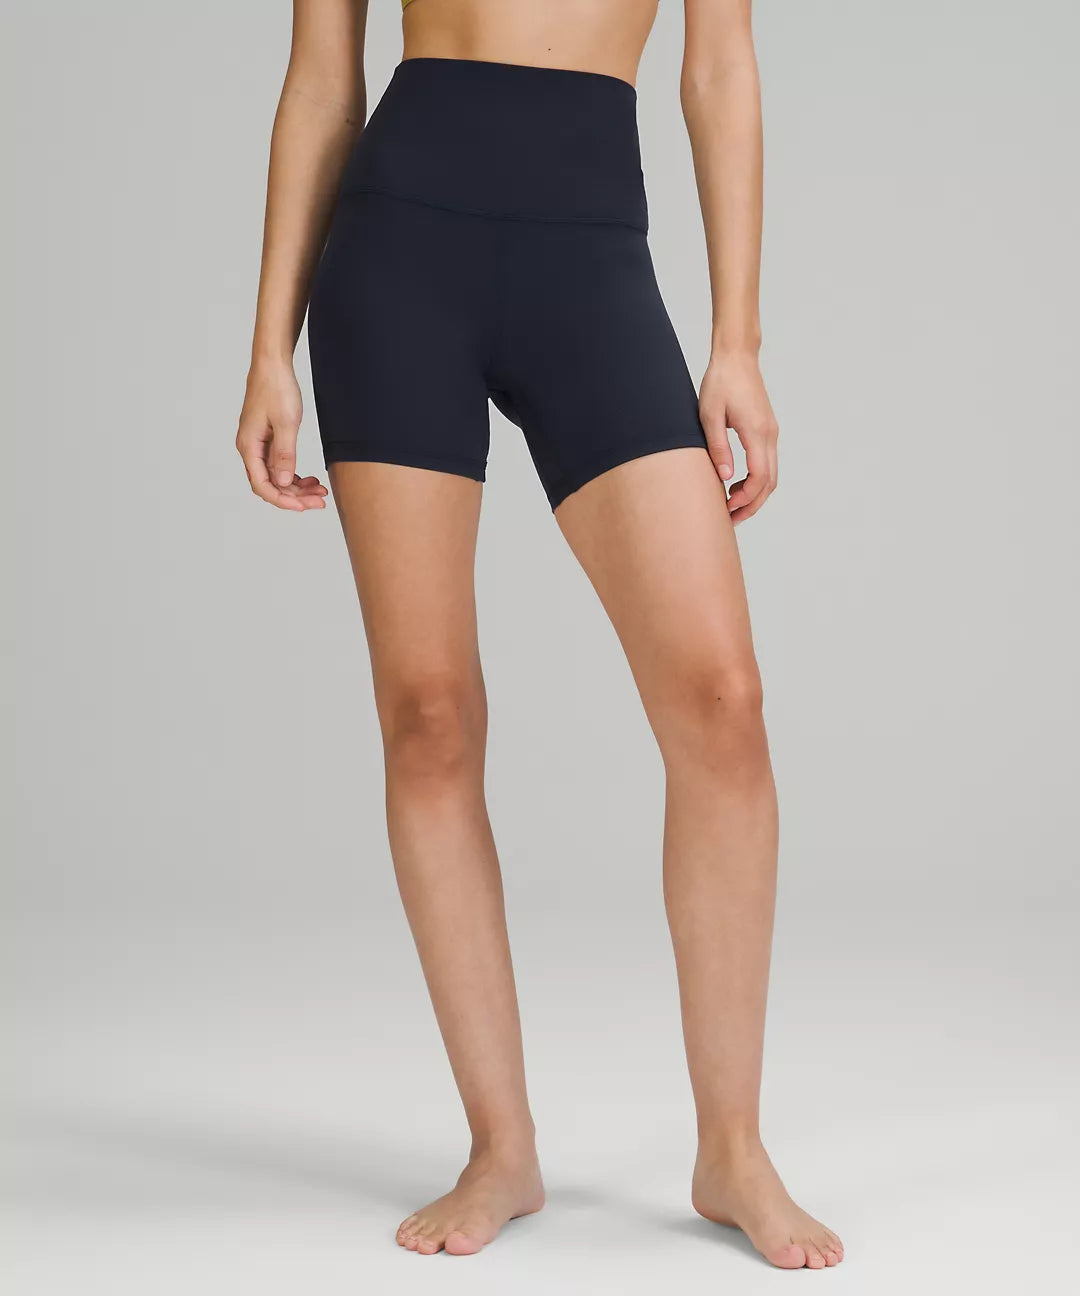 Yoga & Fitness Shorts For Women Align Leggings With Slim Fit, Perfect For  Running, Gym, And Exercise From Lulu3322, $2.66